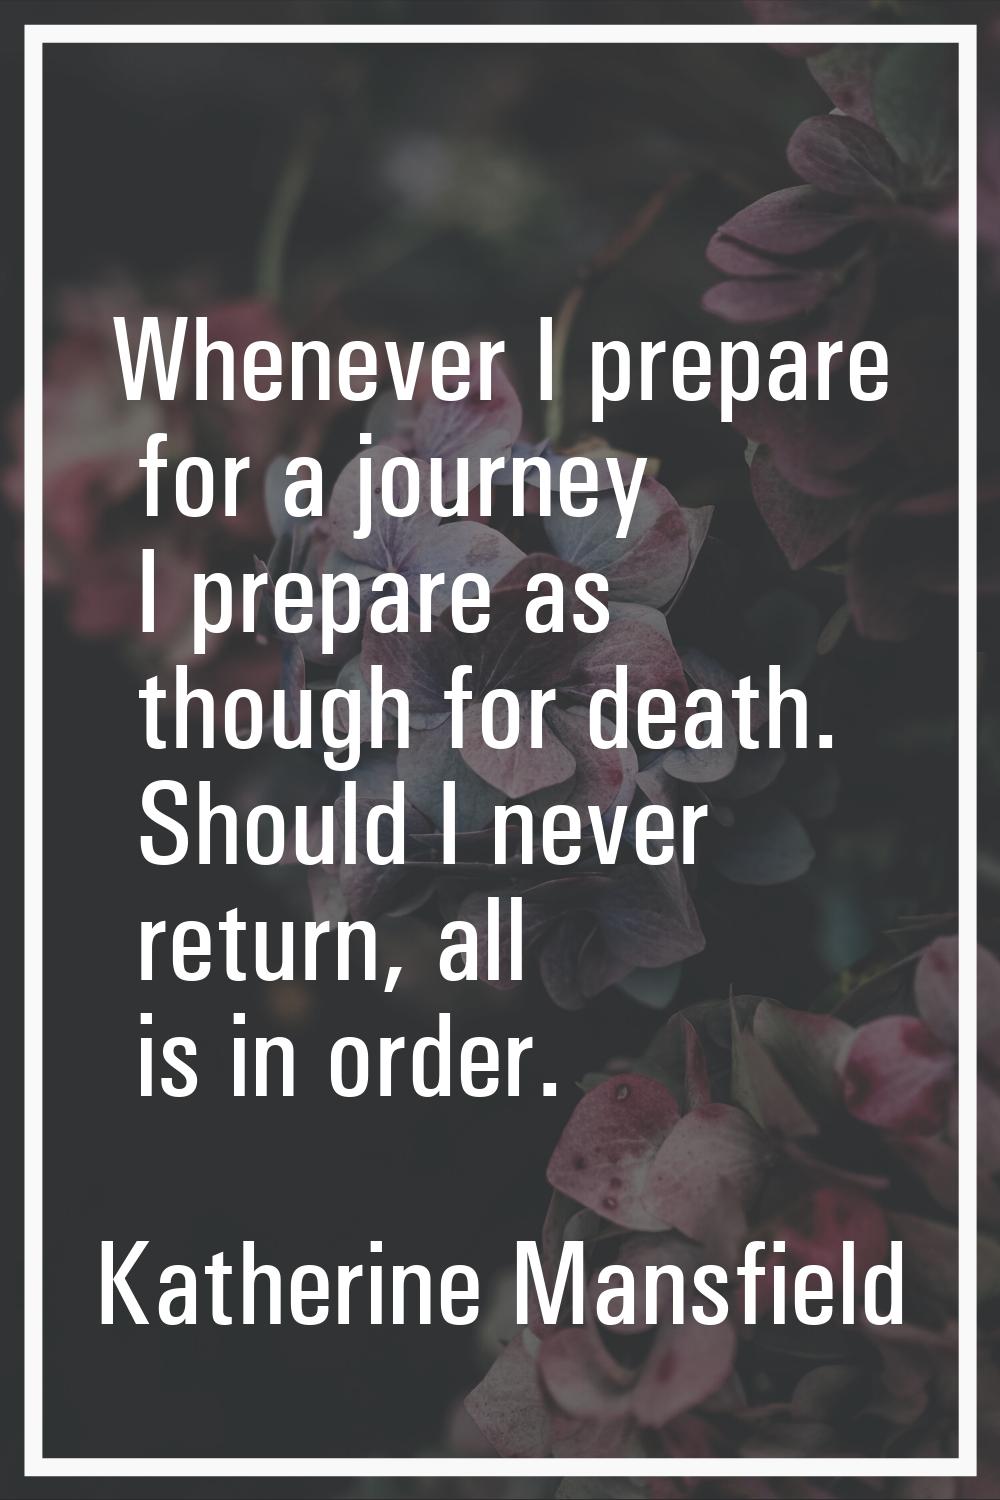 Whenever I prepare for a journey I prepare as though for death. Should I never return, all is in or